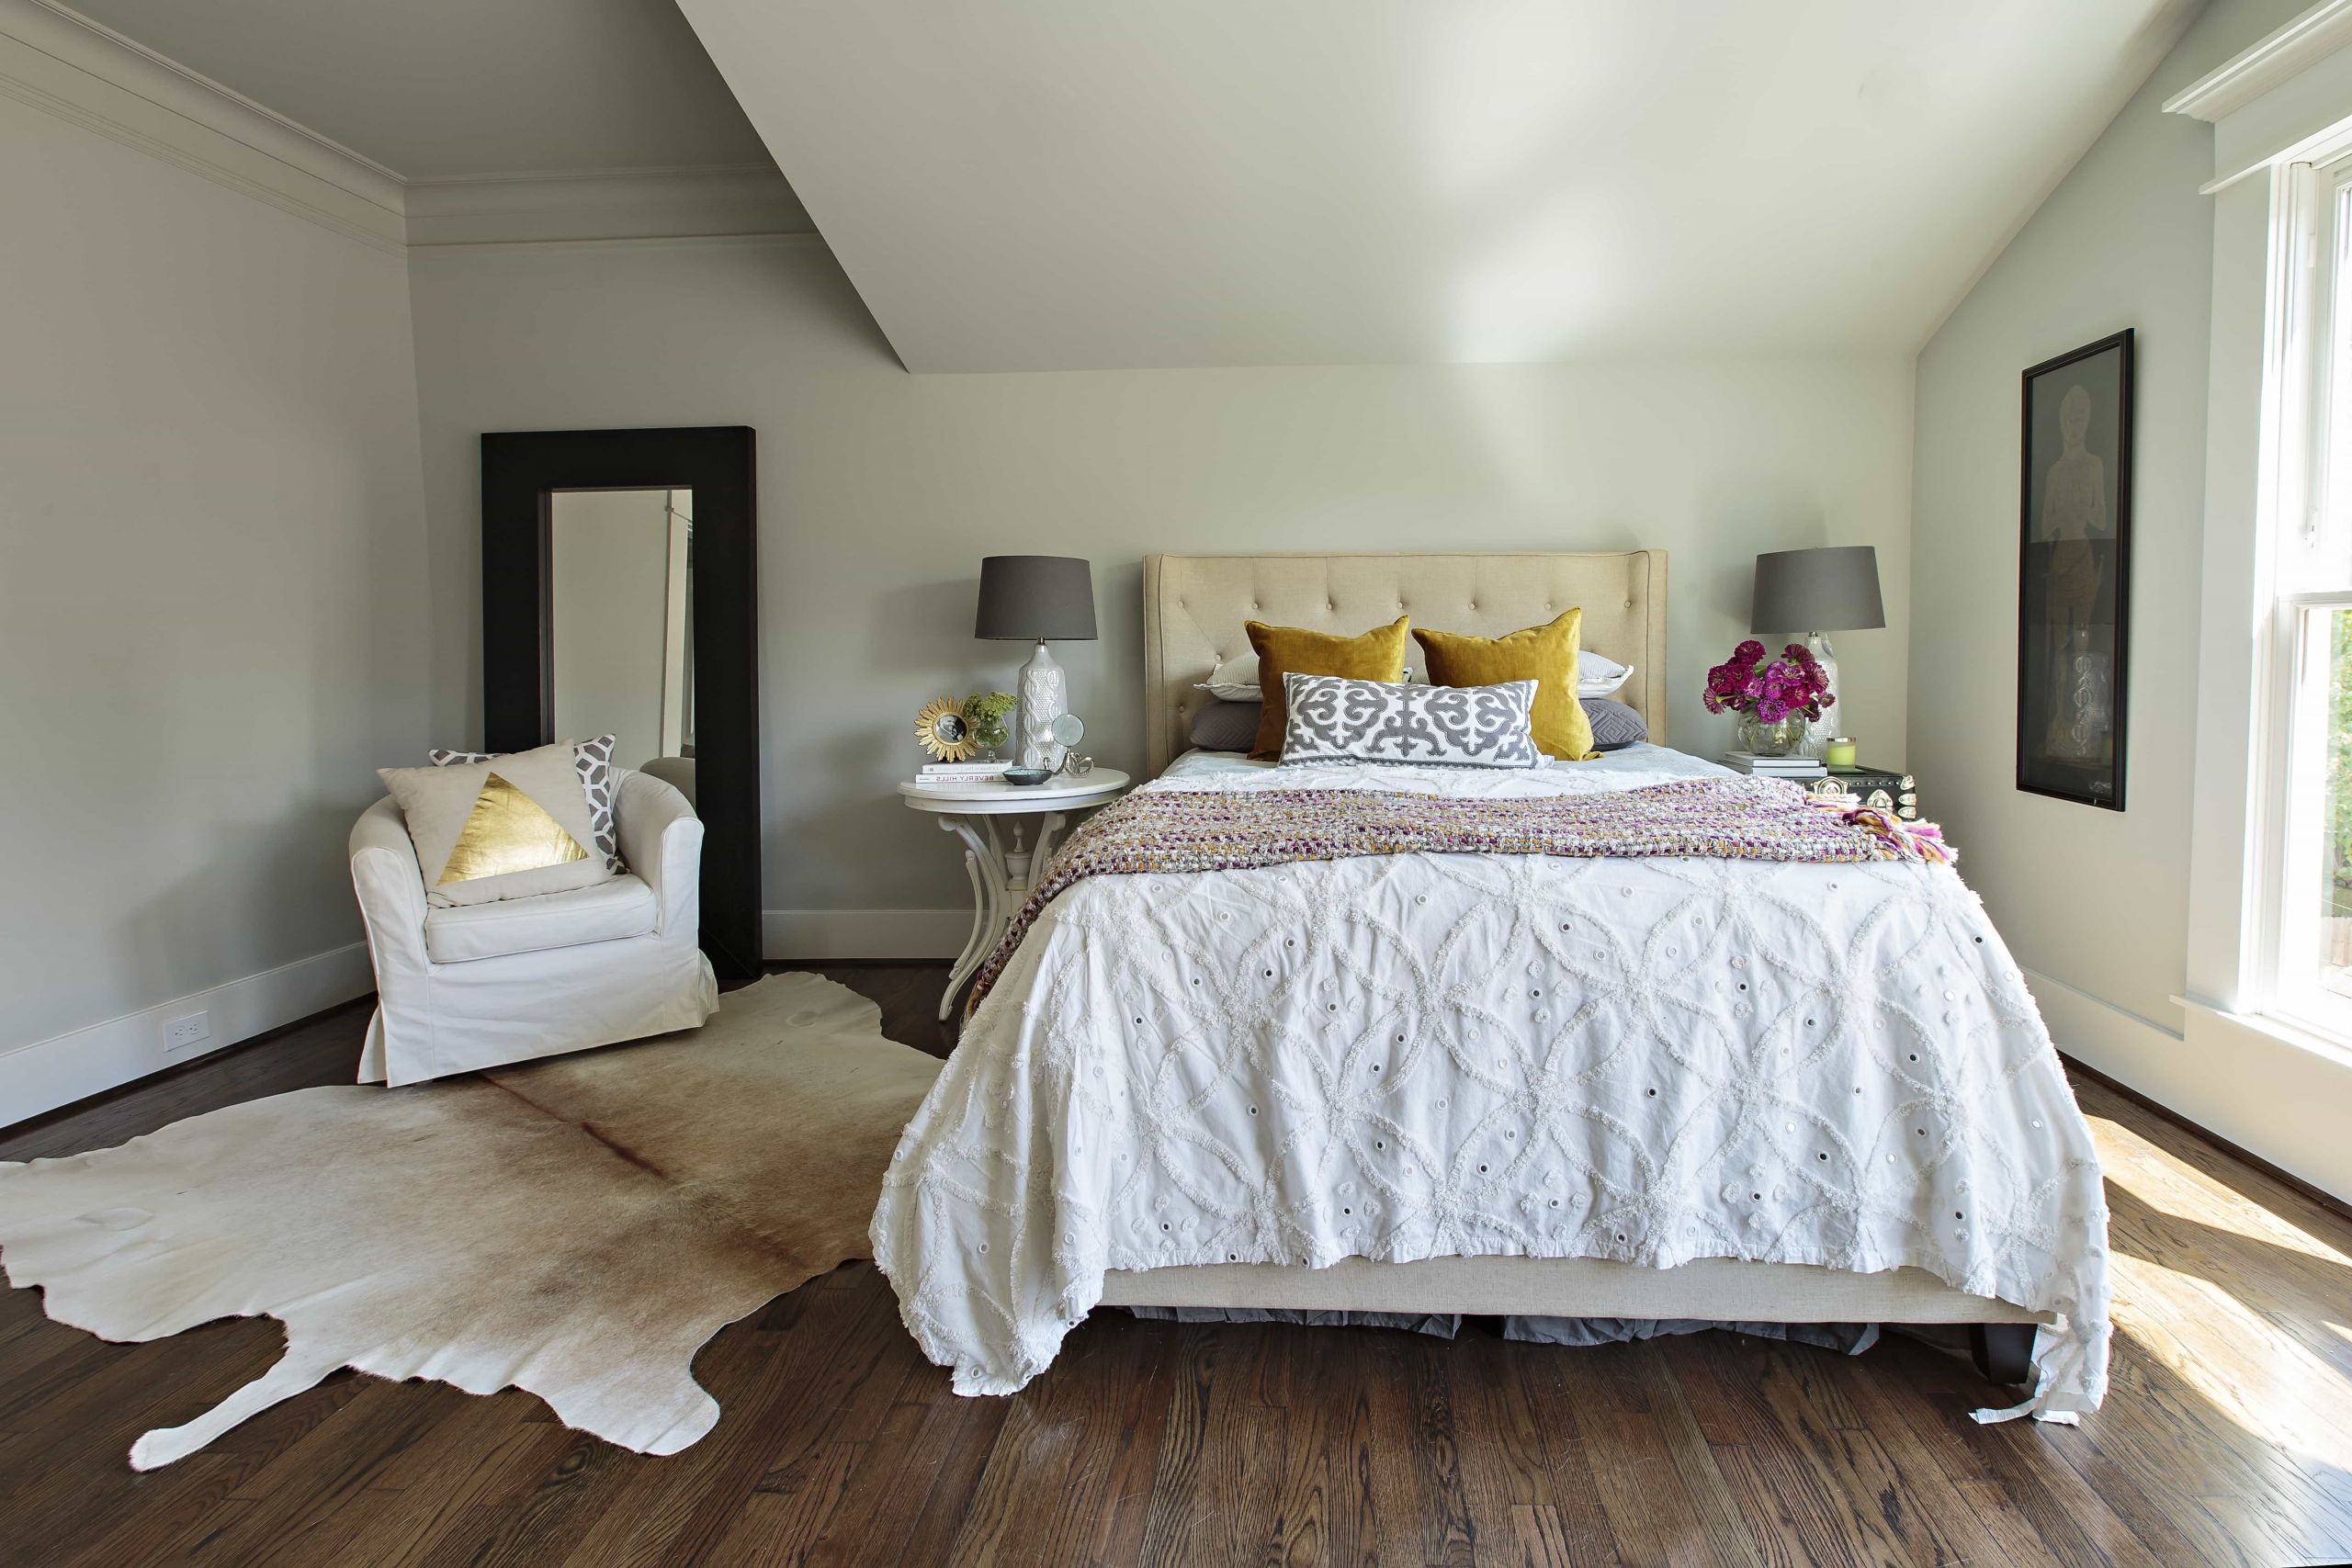 Modern Chic Bedroom Ideas
 How To Decorate A Shabby Chic Bedroom